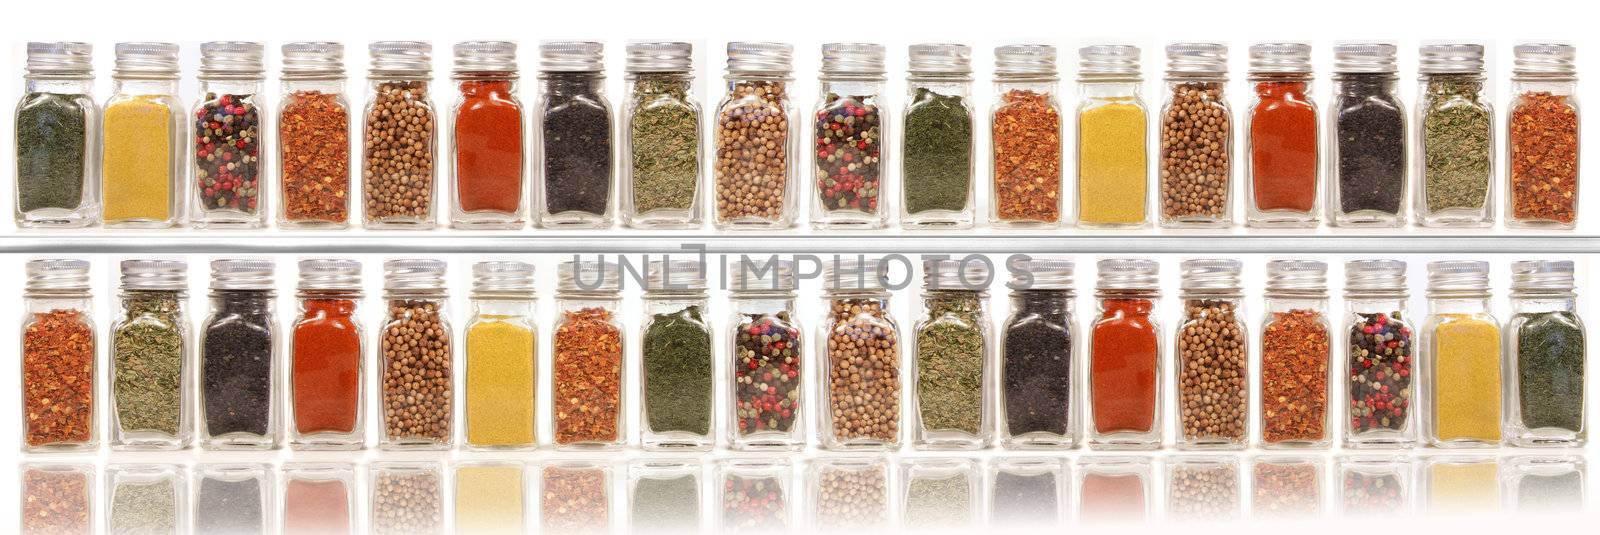 Assorted spices on two layer shelves against white  by Sandralise